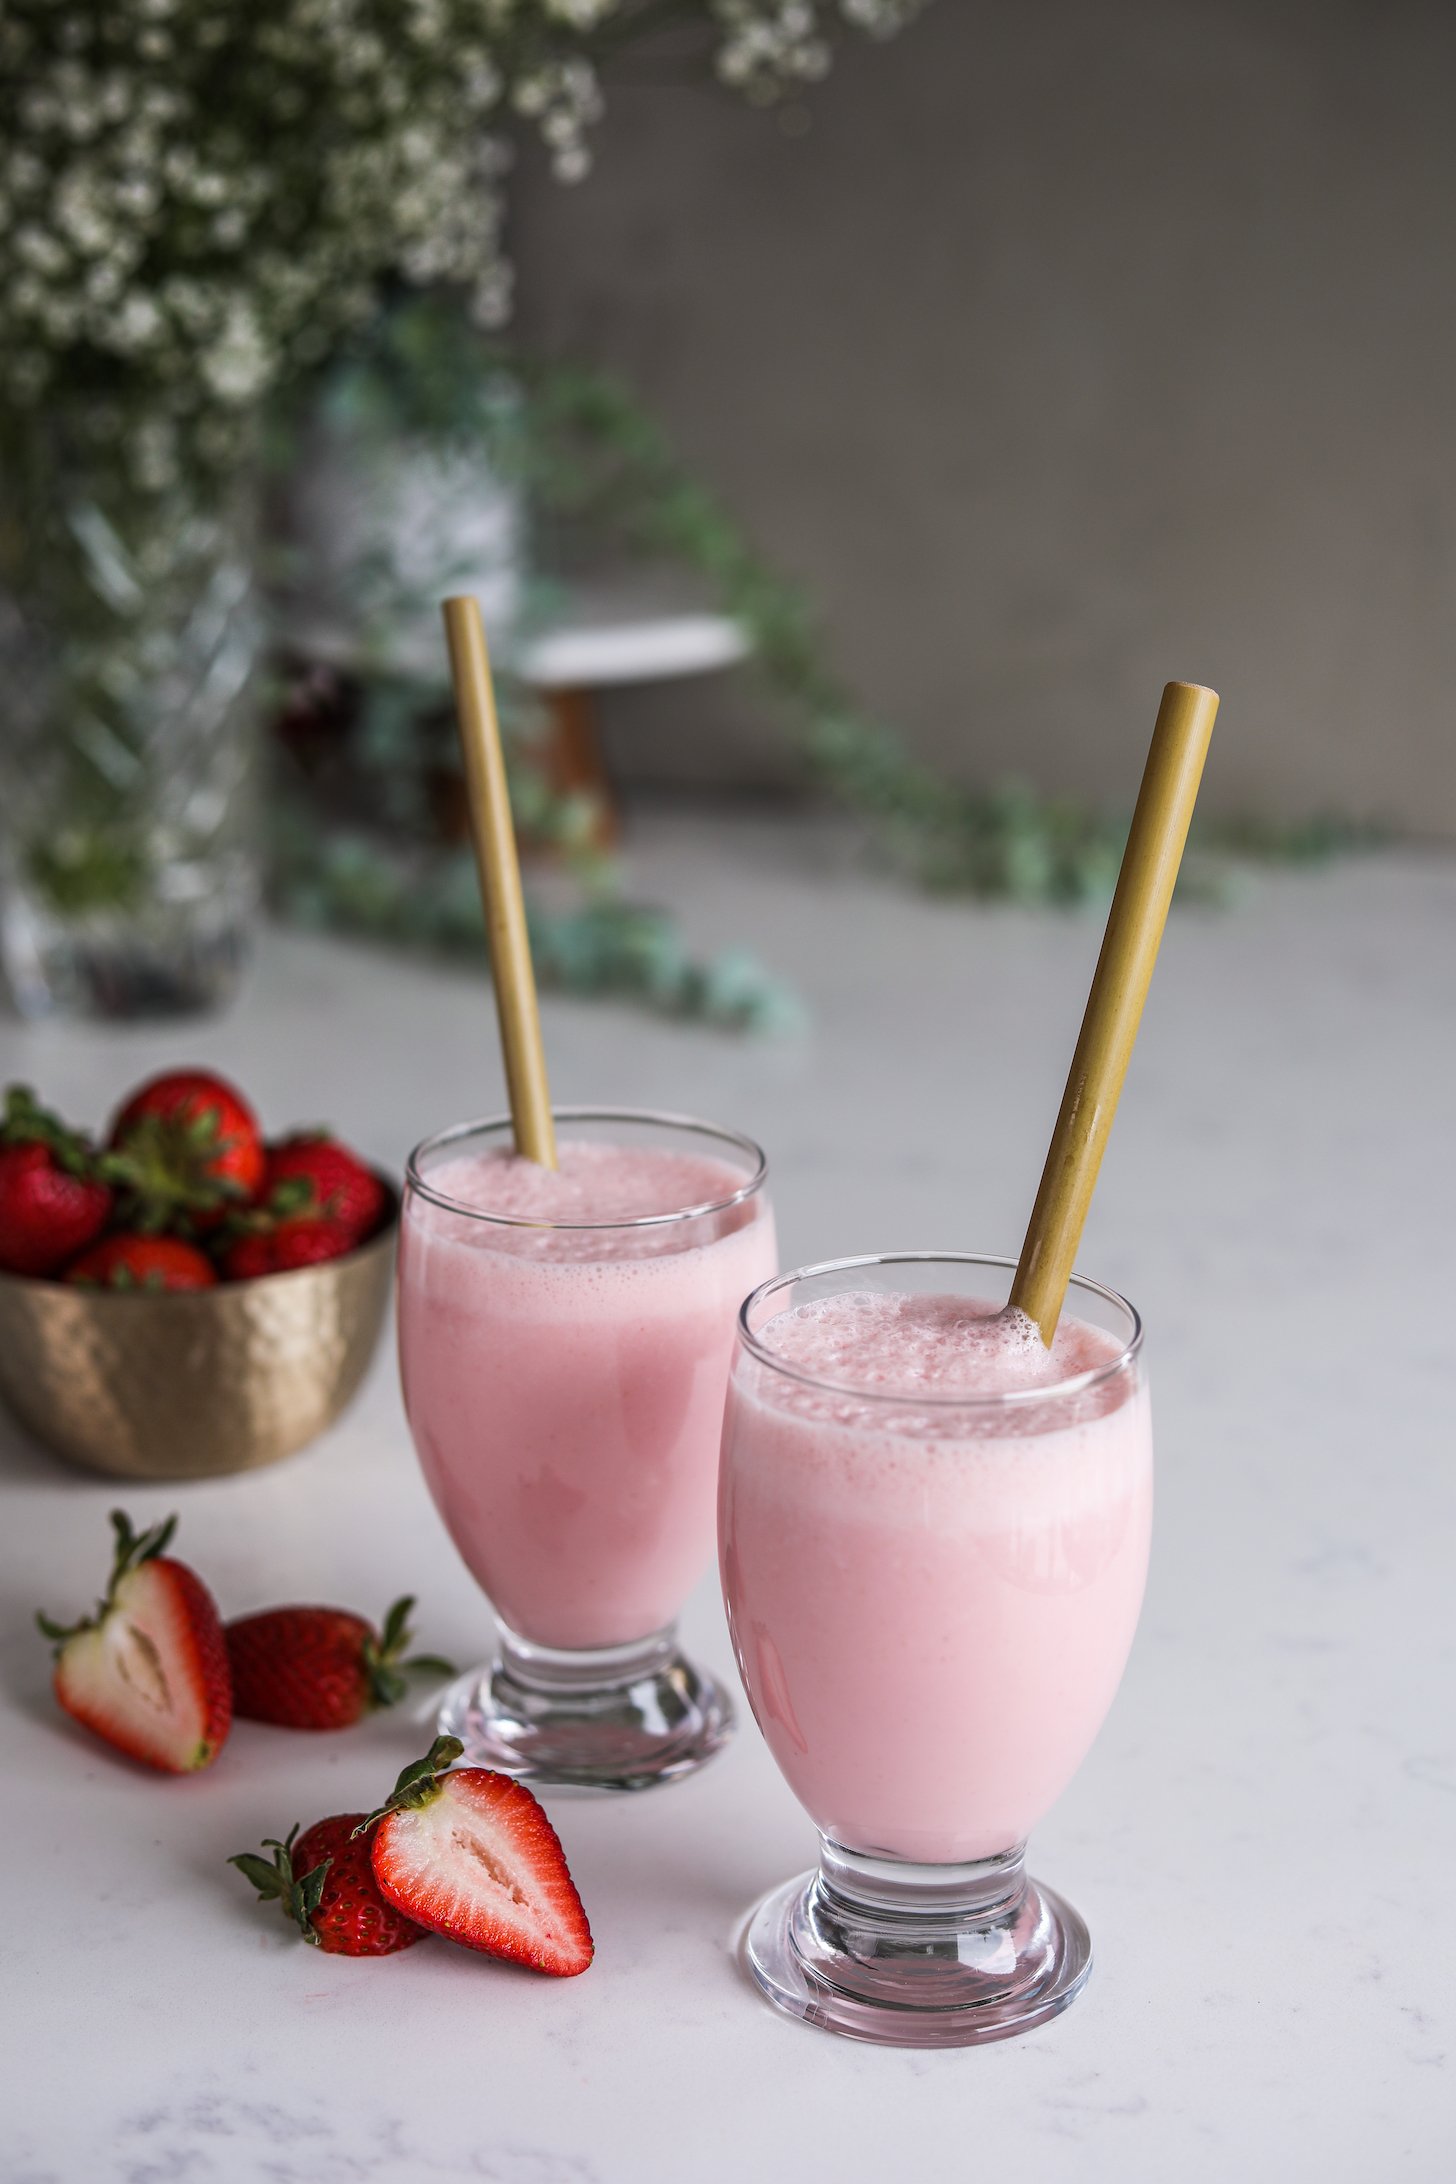 Angled shot of two glasses of a pink frothy drink - each with a straw surrounded by strawberries and plants in the background.